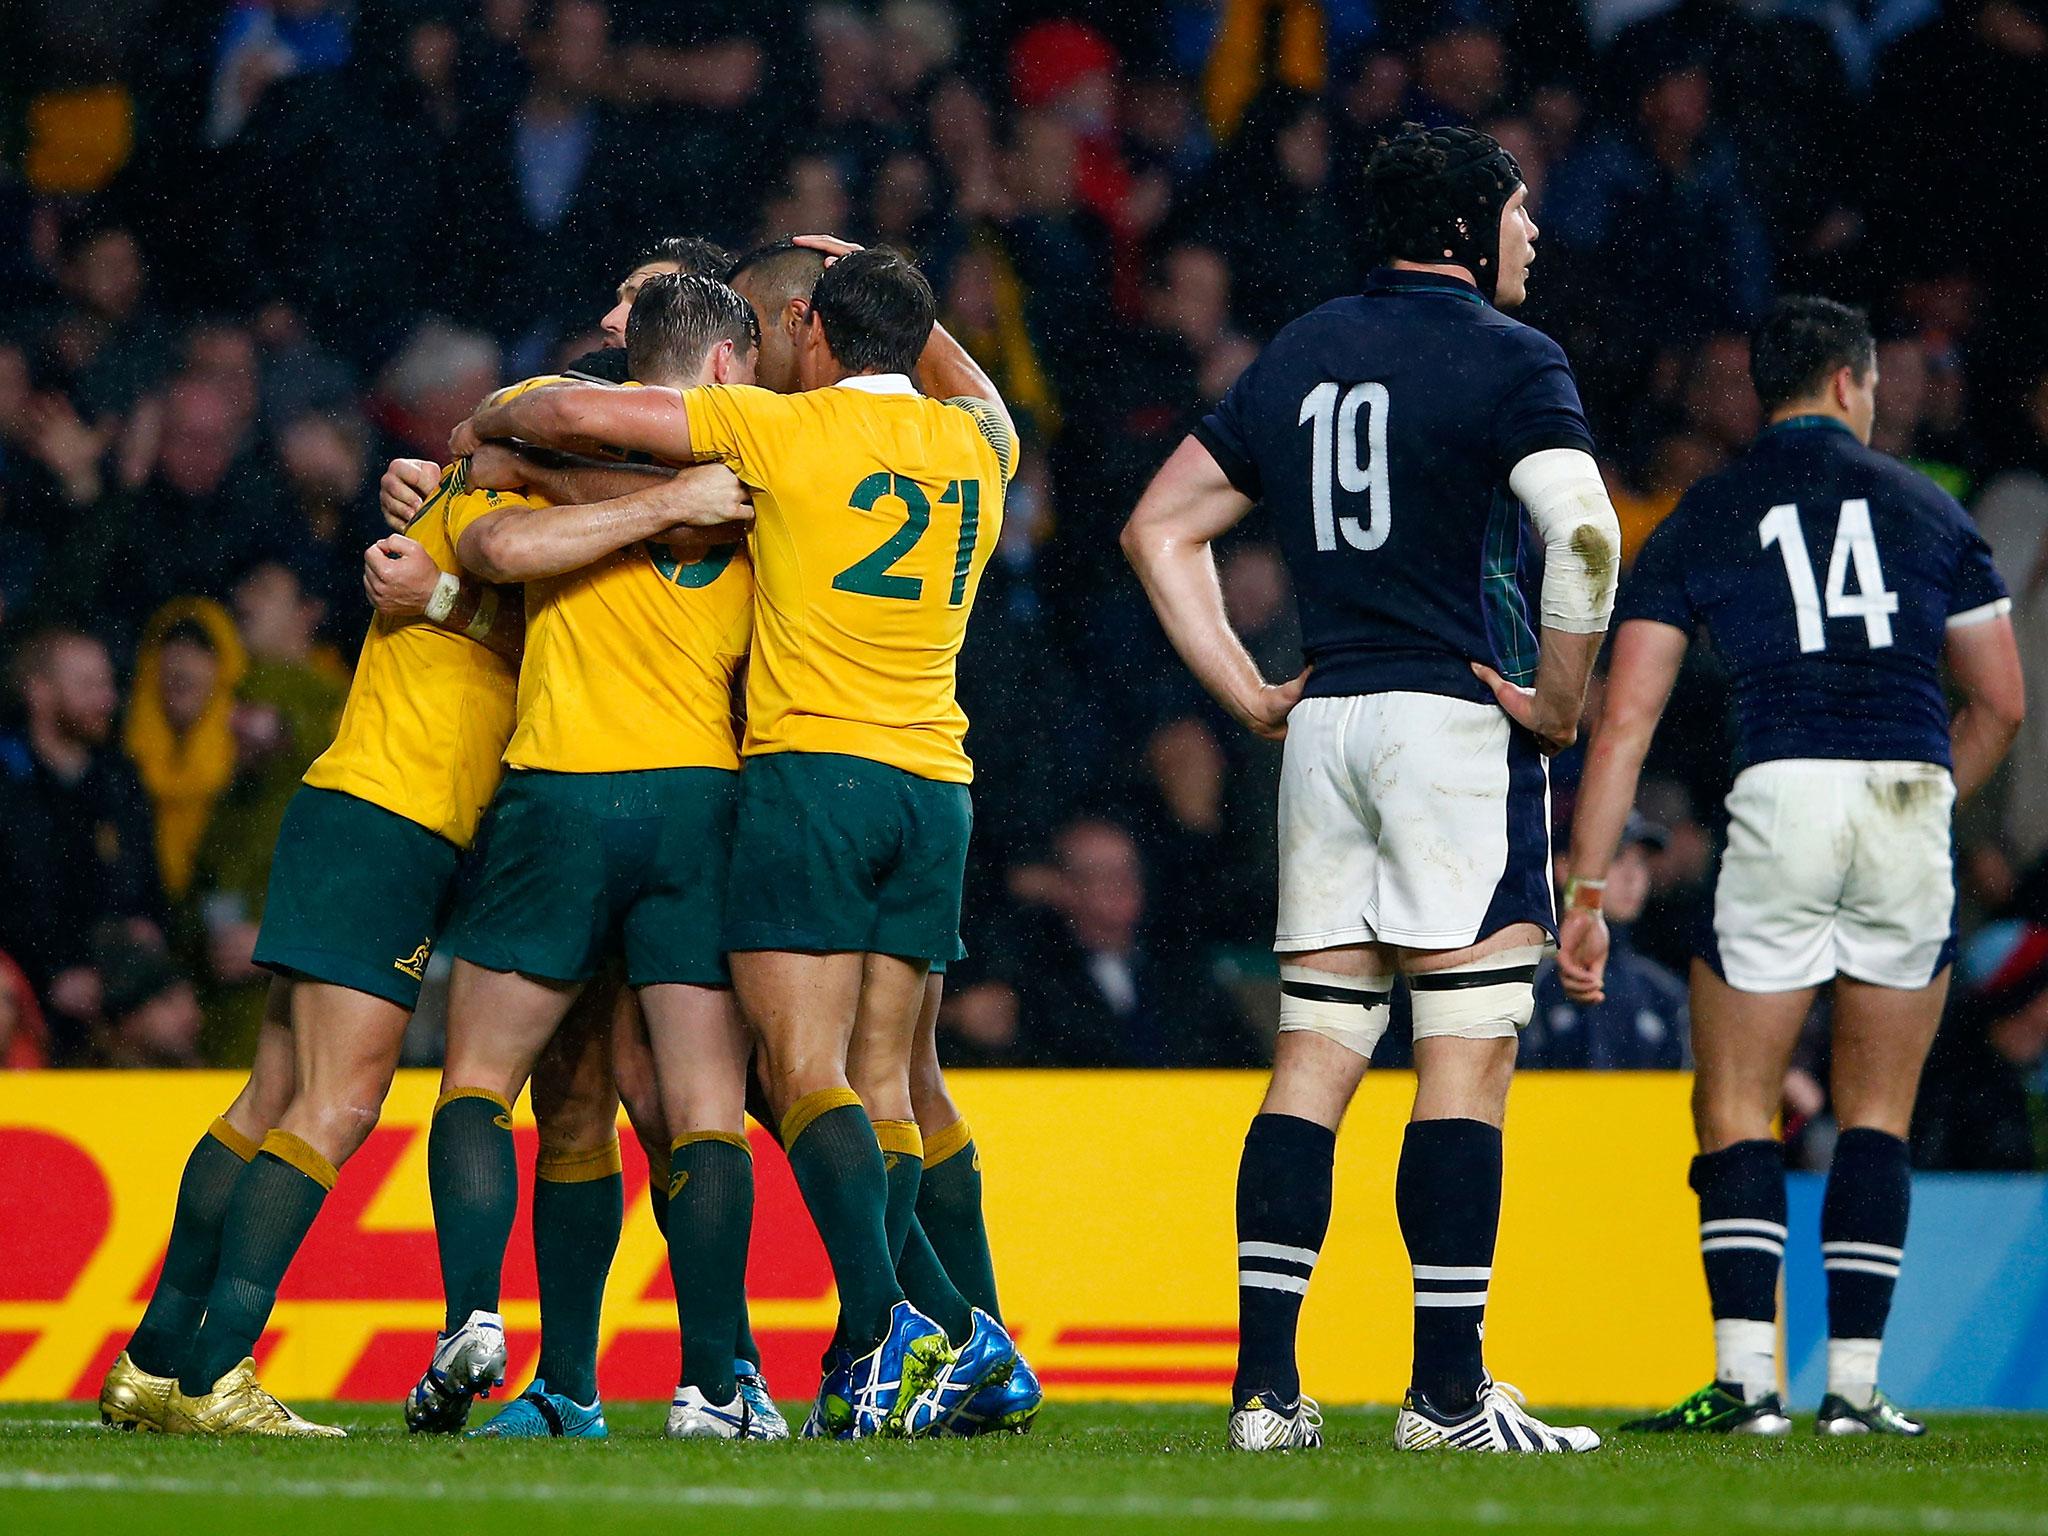 Scotland vs Australia What time does it start, what TV channel is it on and where can I watch it? The Independent The Independent